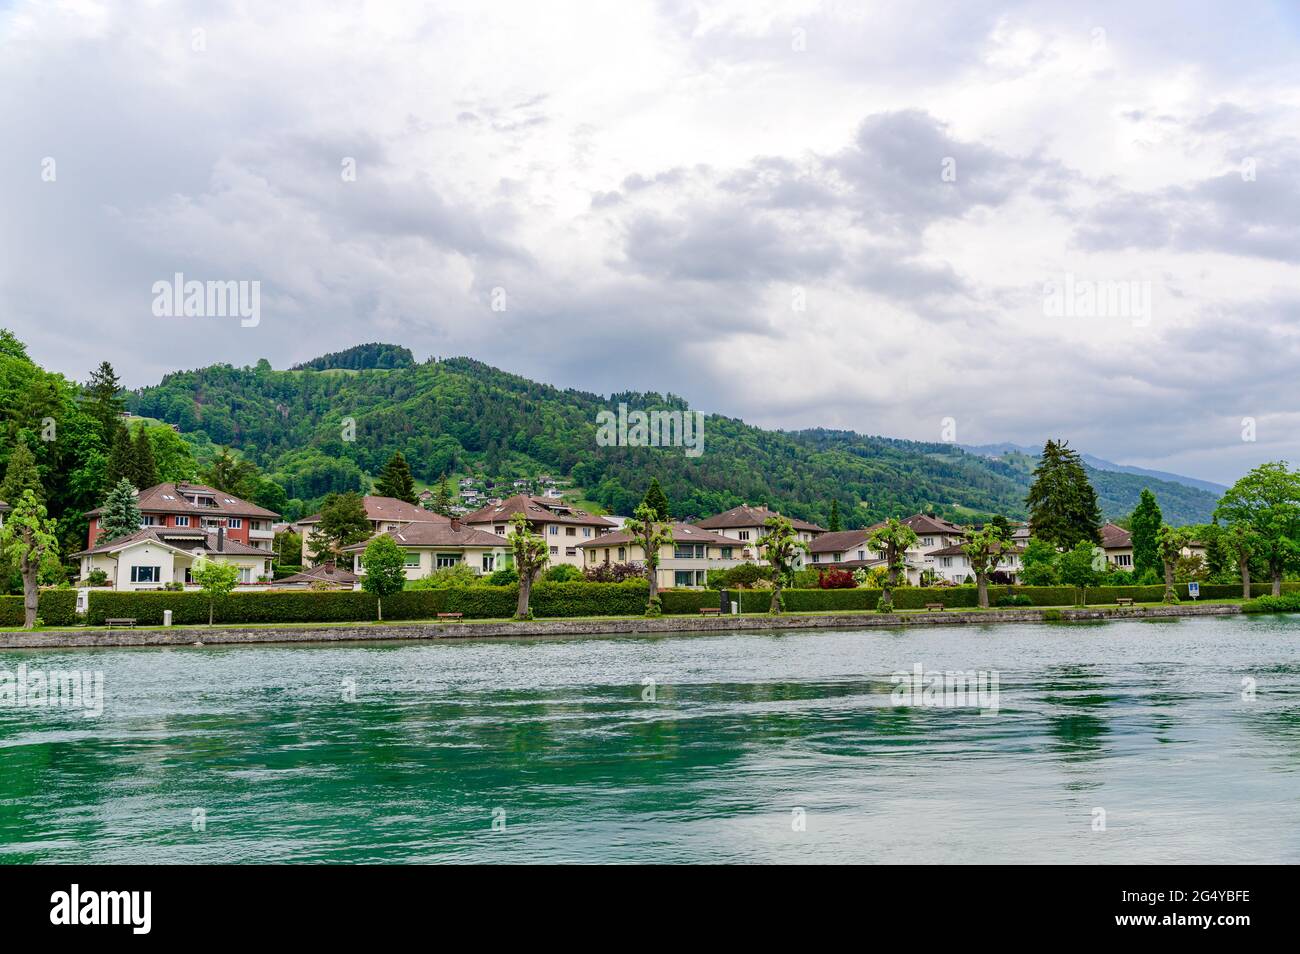 Amazing postcard view on Thun Lake (Thunersee, Thuner See), alps mountains Eiger, Jungfrau, Monch (Moench, Mönch), with a birds. Thun, Switzerland. Stock Photo